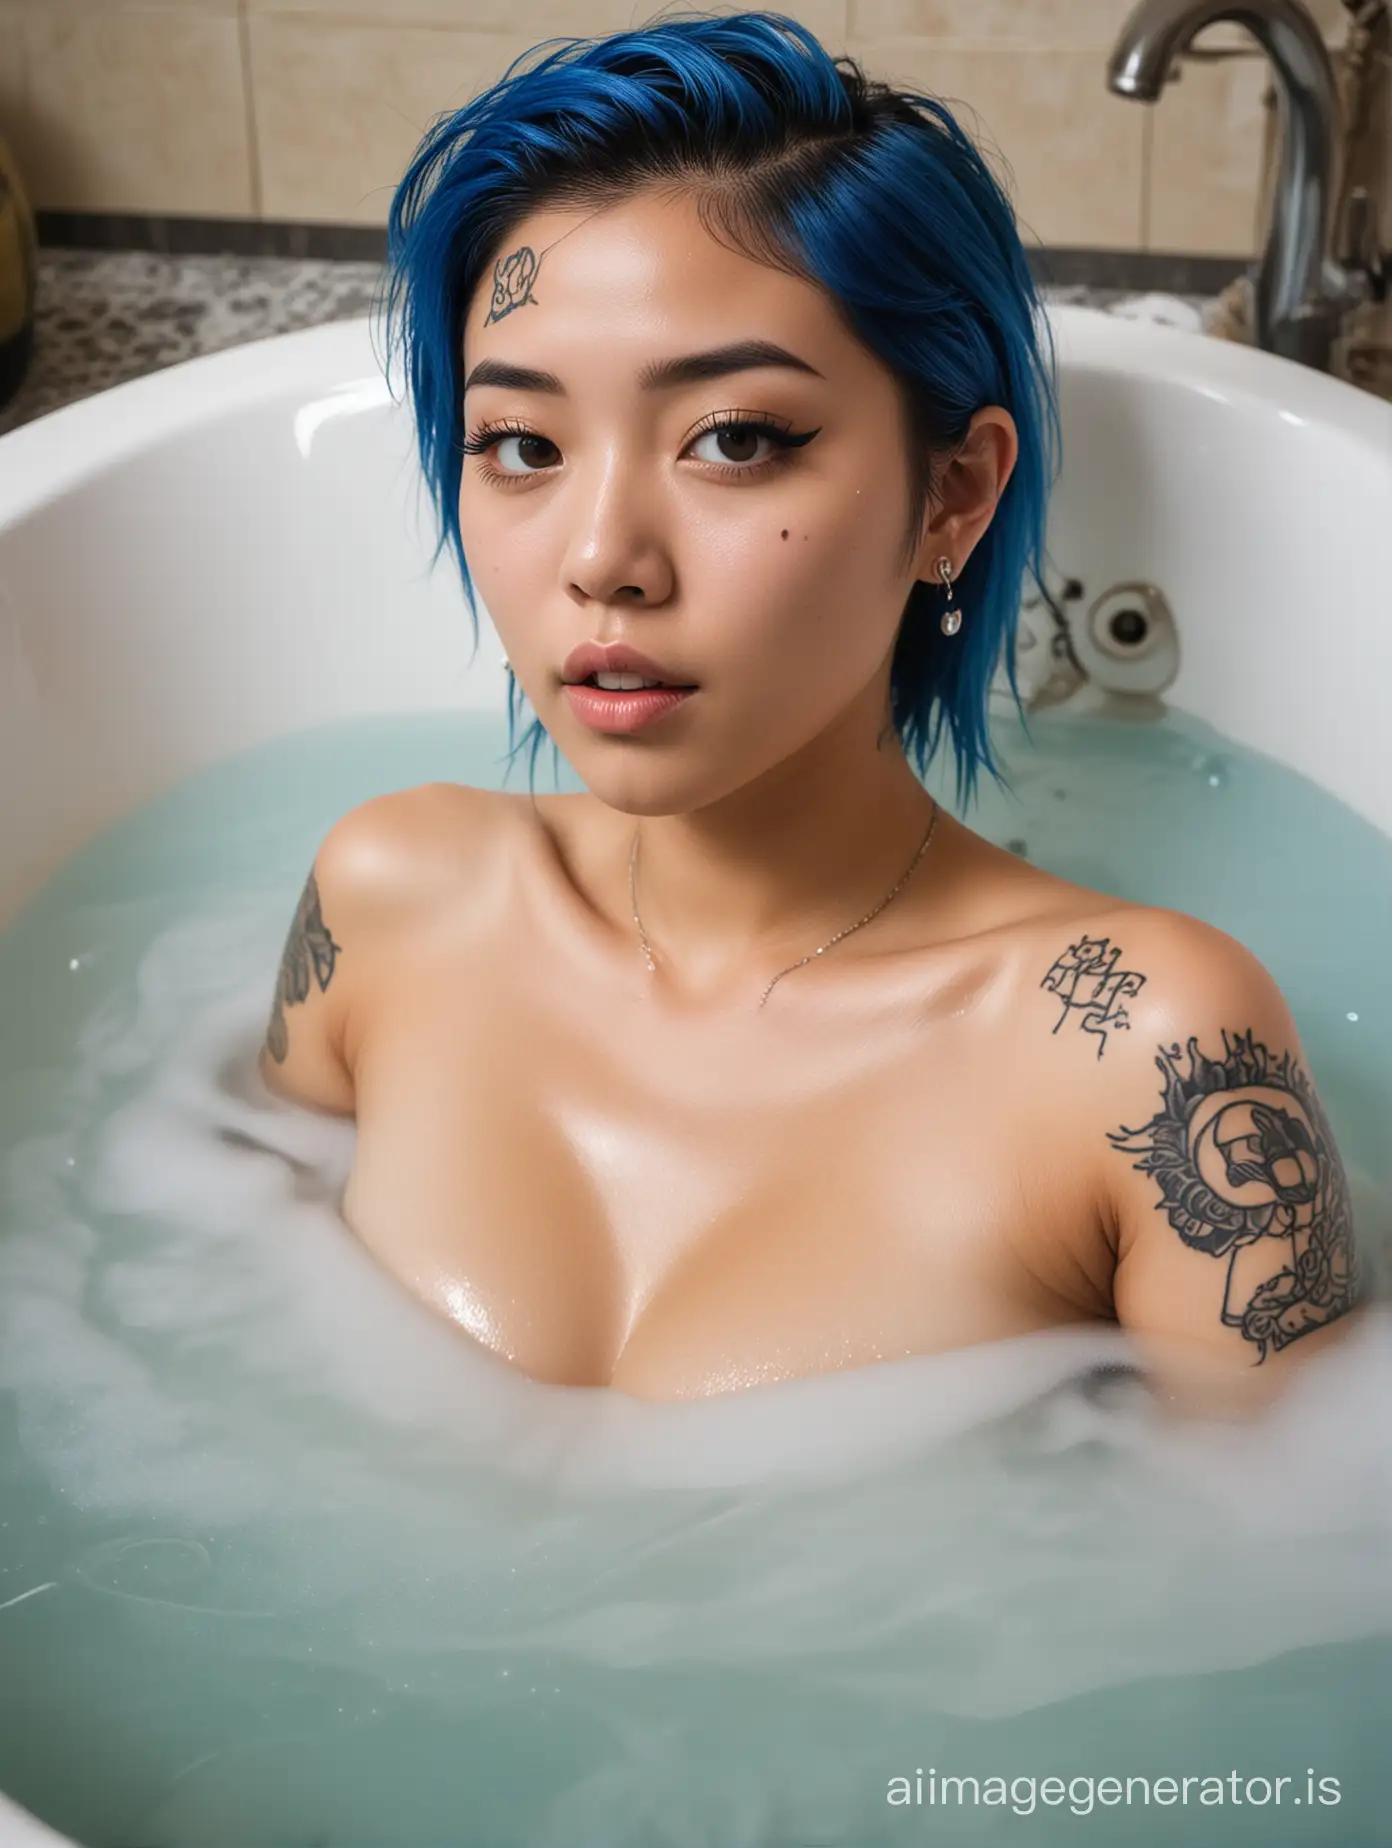 A girl is taking a bubble bath in an old-fashioned bathtub. She is a sultry, petite asian girl with small breasts, tattoos and piercings. Her blue hair is slicked back, sleek, and has multiple shades of blue running through it. It's a perfect mix of edgy and classic.